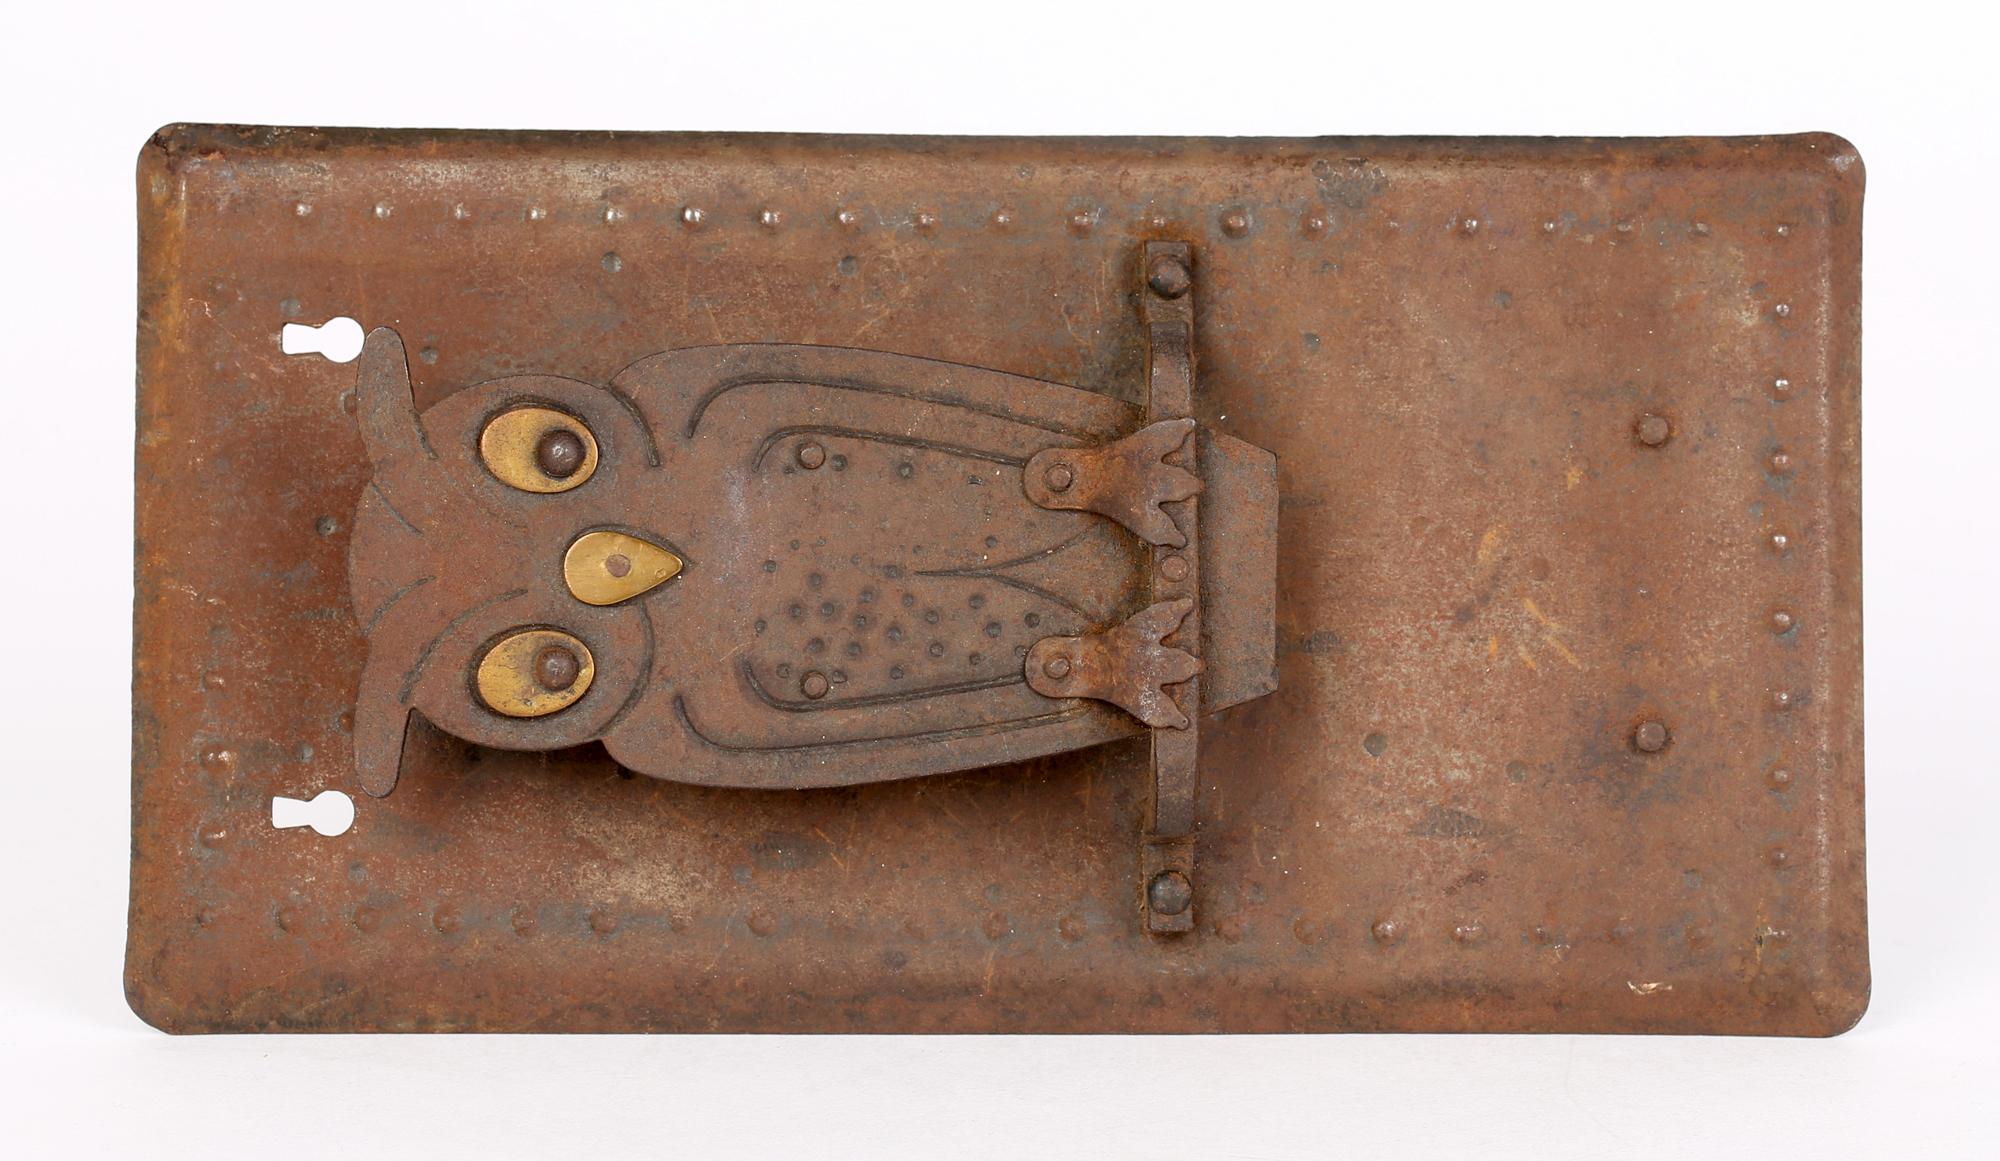 A very stylish German Jugendstil iron industrial style owl wall hanging match box holder designed by Hugo Berger for Goberg and dating from around 1910. This heavily made sheet metal wall hanging match box holder is modelled as an owl sitting on a